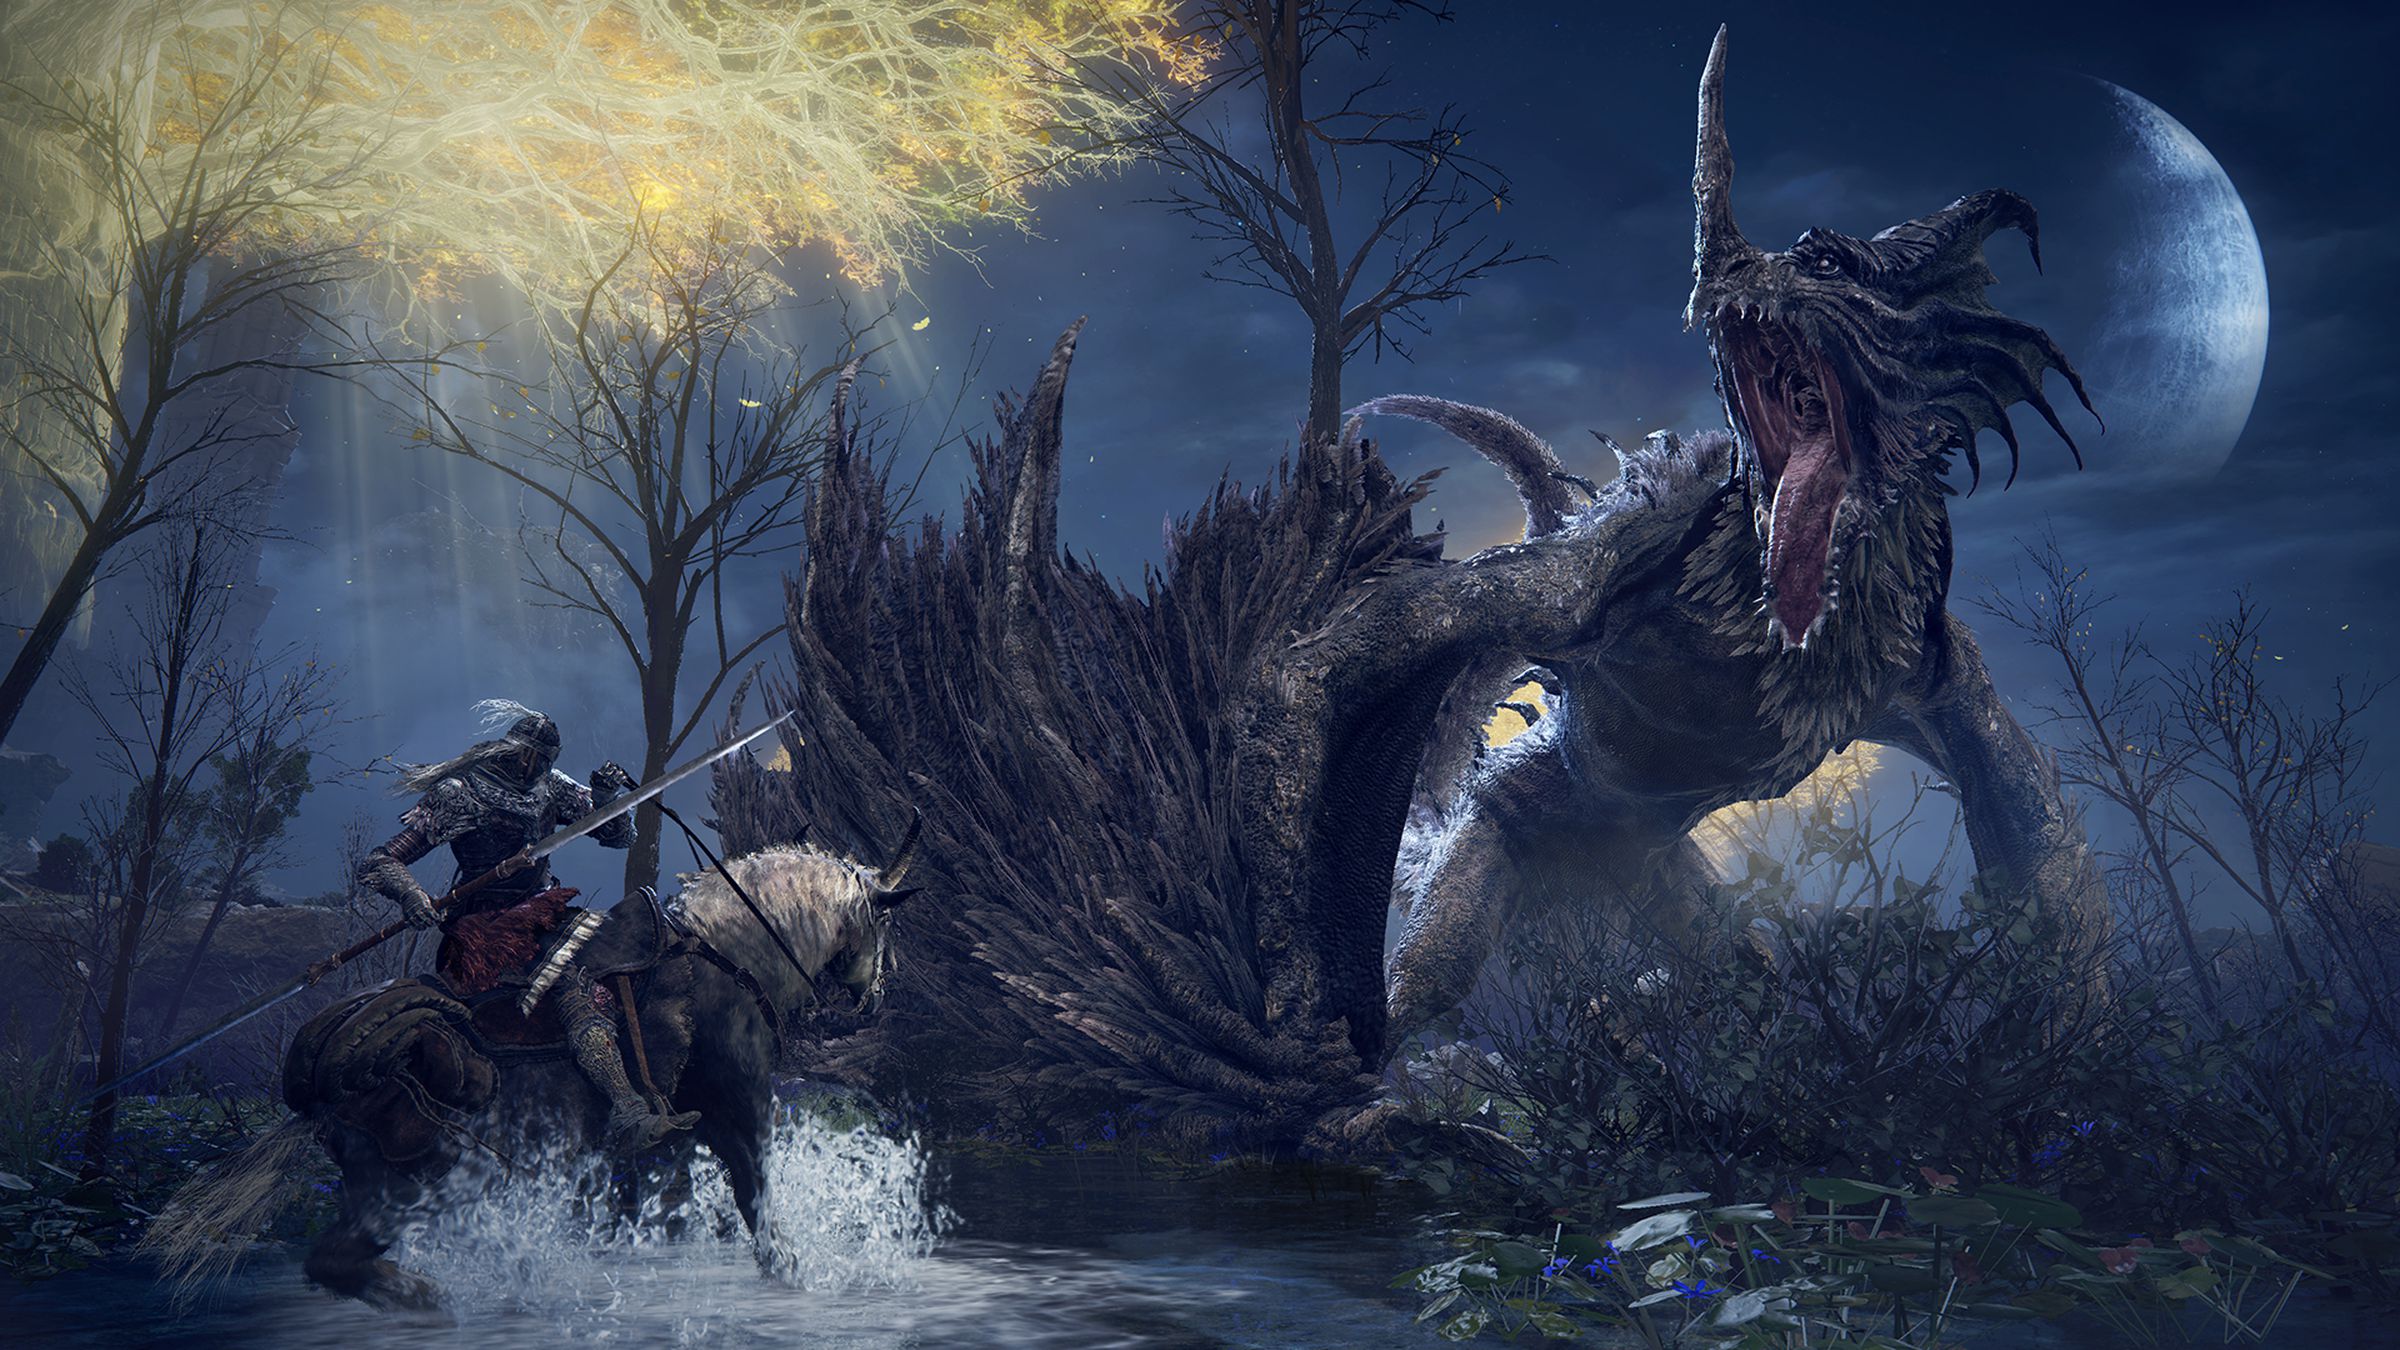 A screenshot of a character fighting a beast from the game Elden Ring.